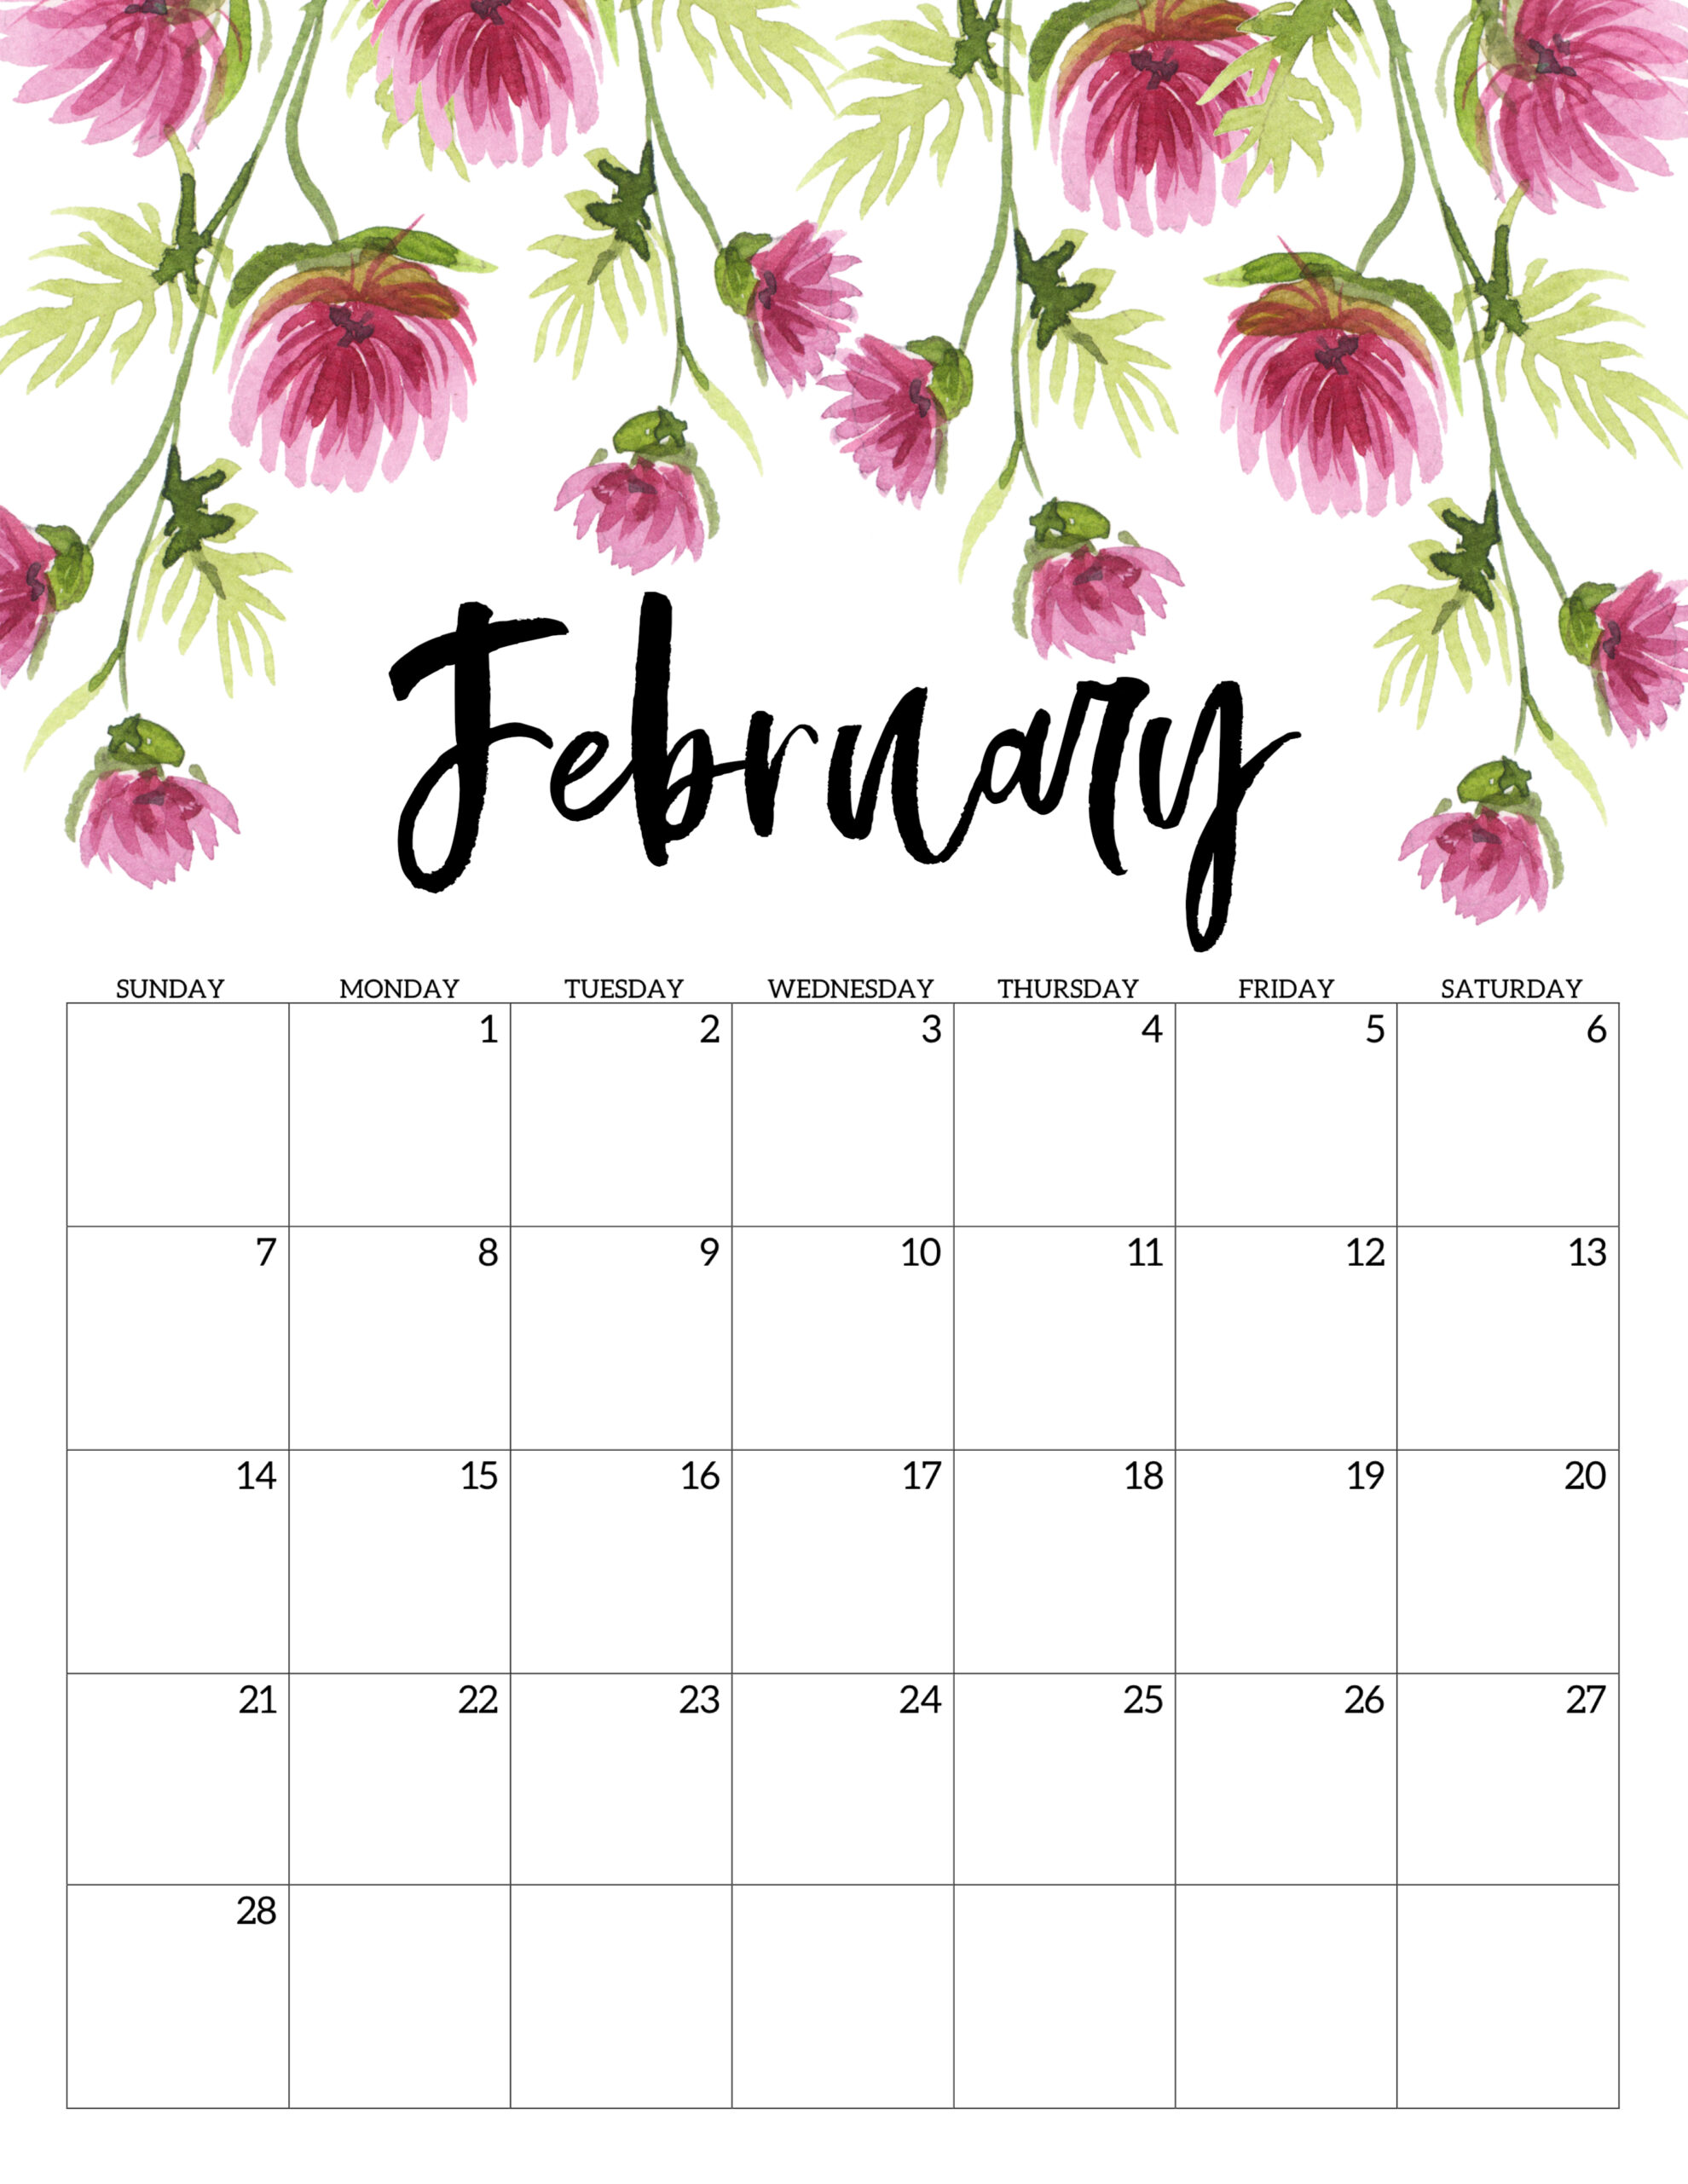 30 Free February 2021 Calendars For Home Or Office Onedesblog Calendars starting from monday to sunday. 30 free february 2021 calendars for